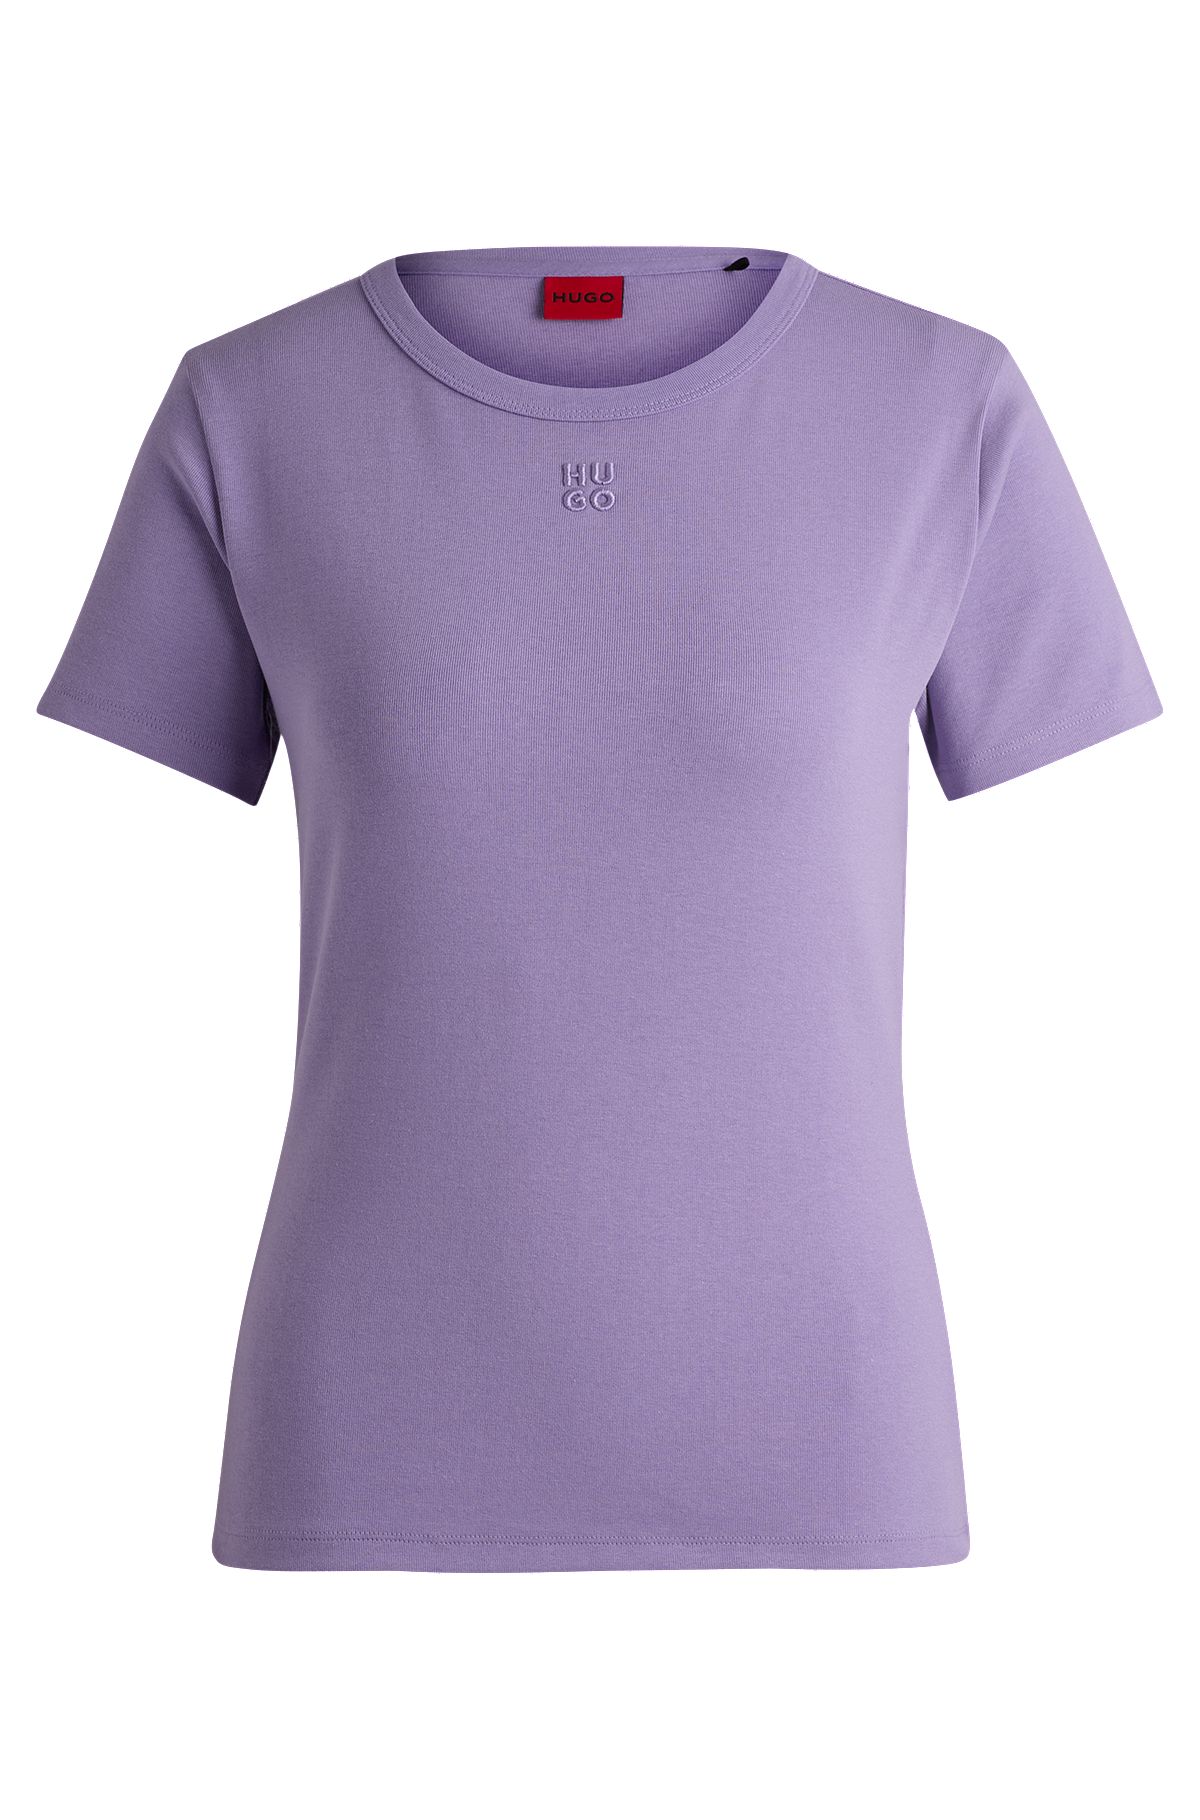 Cotton-blend T-shirt with embroidered stacked logo, Purple